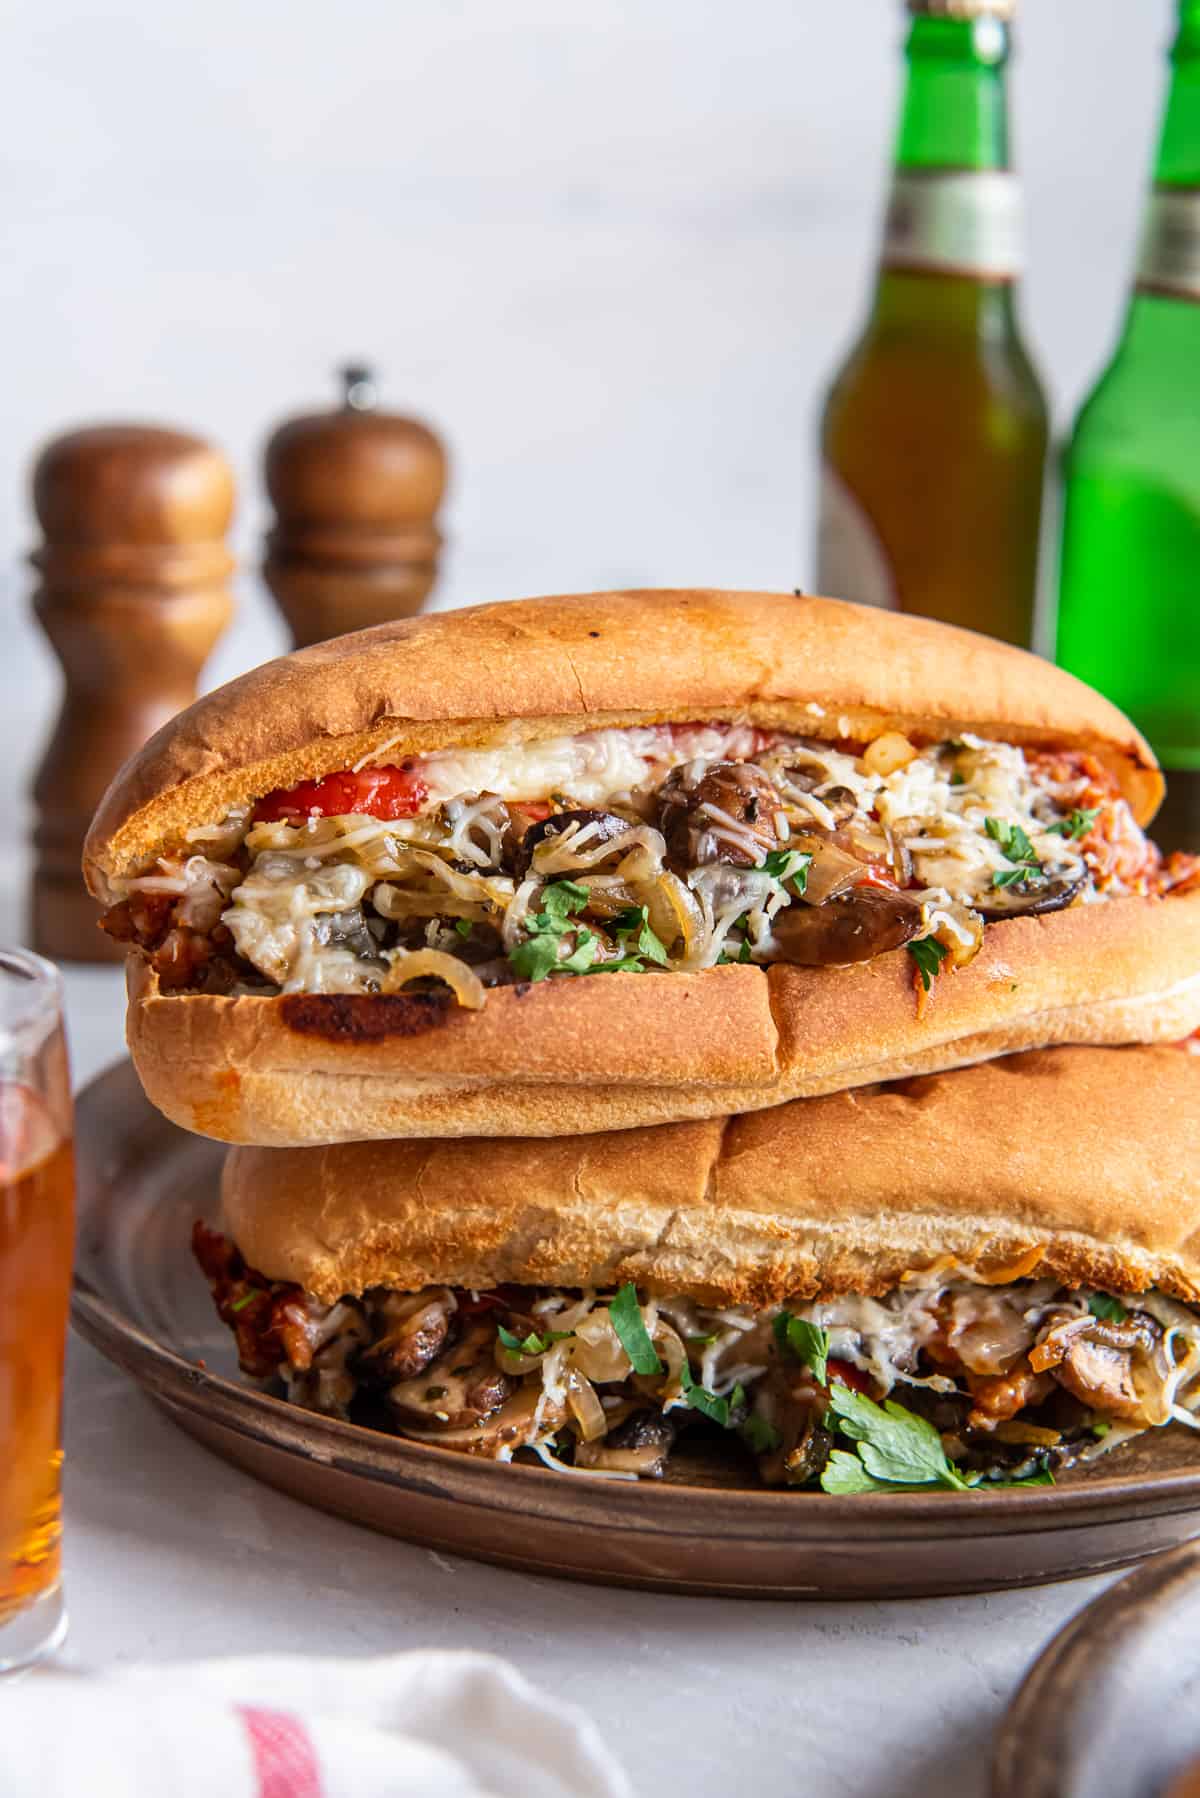 A stack of two Italian Sausage Sandwiches on toasted hoagie rolls on a platter in front of beer bottles and salt and pepper shakers.